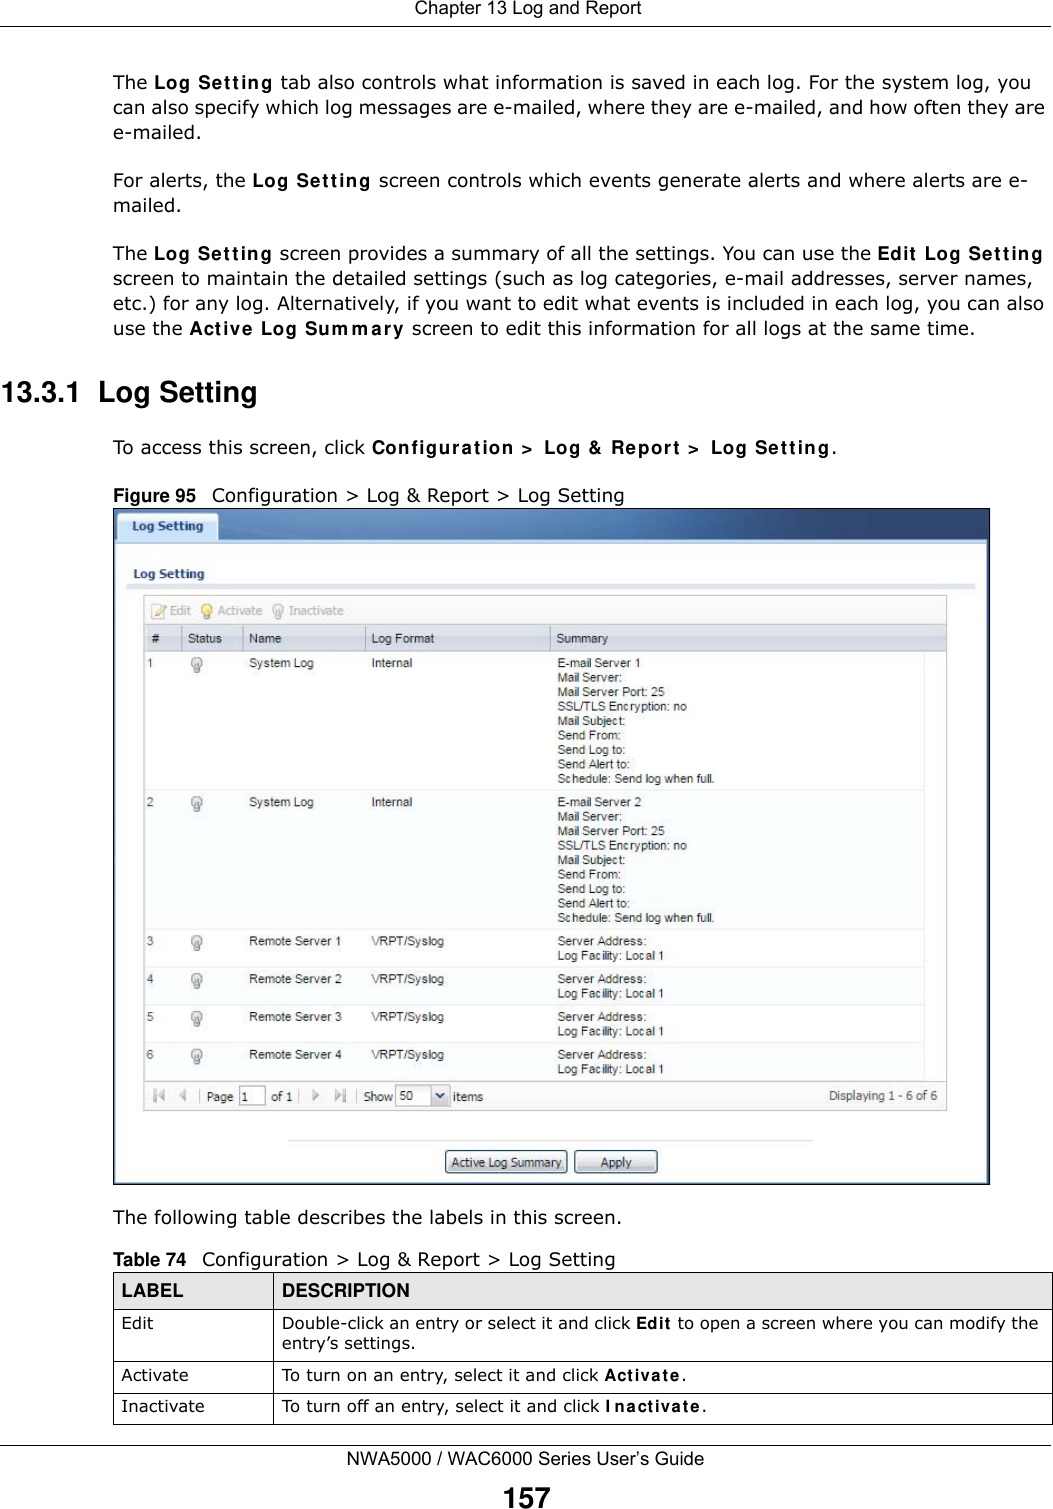  Chapter 13 Log and ReportNWA5000 / WAC6000 Series User’s Guide157The Log Setting tab also controls what information is saved in each log. For the system log, you can also specify which log messages are e-mailed, where they are e-mailed, and how often they are e-mailed.For alerts, the Log Setting screen controls which events generate alerts and where alerts are e-mailed.The Log Setting screen provides a summary of all the settings. You can use the Edit Log Setting screen to maintain the detailed settings (such as log categories, e-mail addresses, server names, etc.) for any log. Alternatively, if you want to edit what events is included in each log, you can also use the Active Log Summary screen to edit this information for all logs at the same time.13.3.1  Log SettingTo access this screen, click Configuration &gt; Log &amp; Report &gt; Log Setting.Figure 95   Configuration &gt; Log &amp; Report &gt; Log SettingThe following table describes the labels in this screen. Table 74   Configuration &gt; Log &amp; Report &gt; Log SettingLABEL DESCRIPTIONEdit Double-click an entry or select it and click Edit to open a screen where you can modify the entry’s settings. Activate To turn on an entry, select it and click Activate.Inactivate To turn off an entry, select it and click Inactivate.